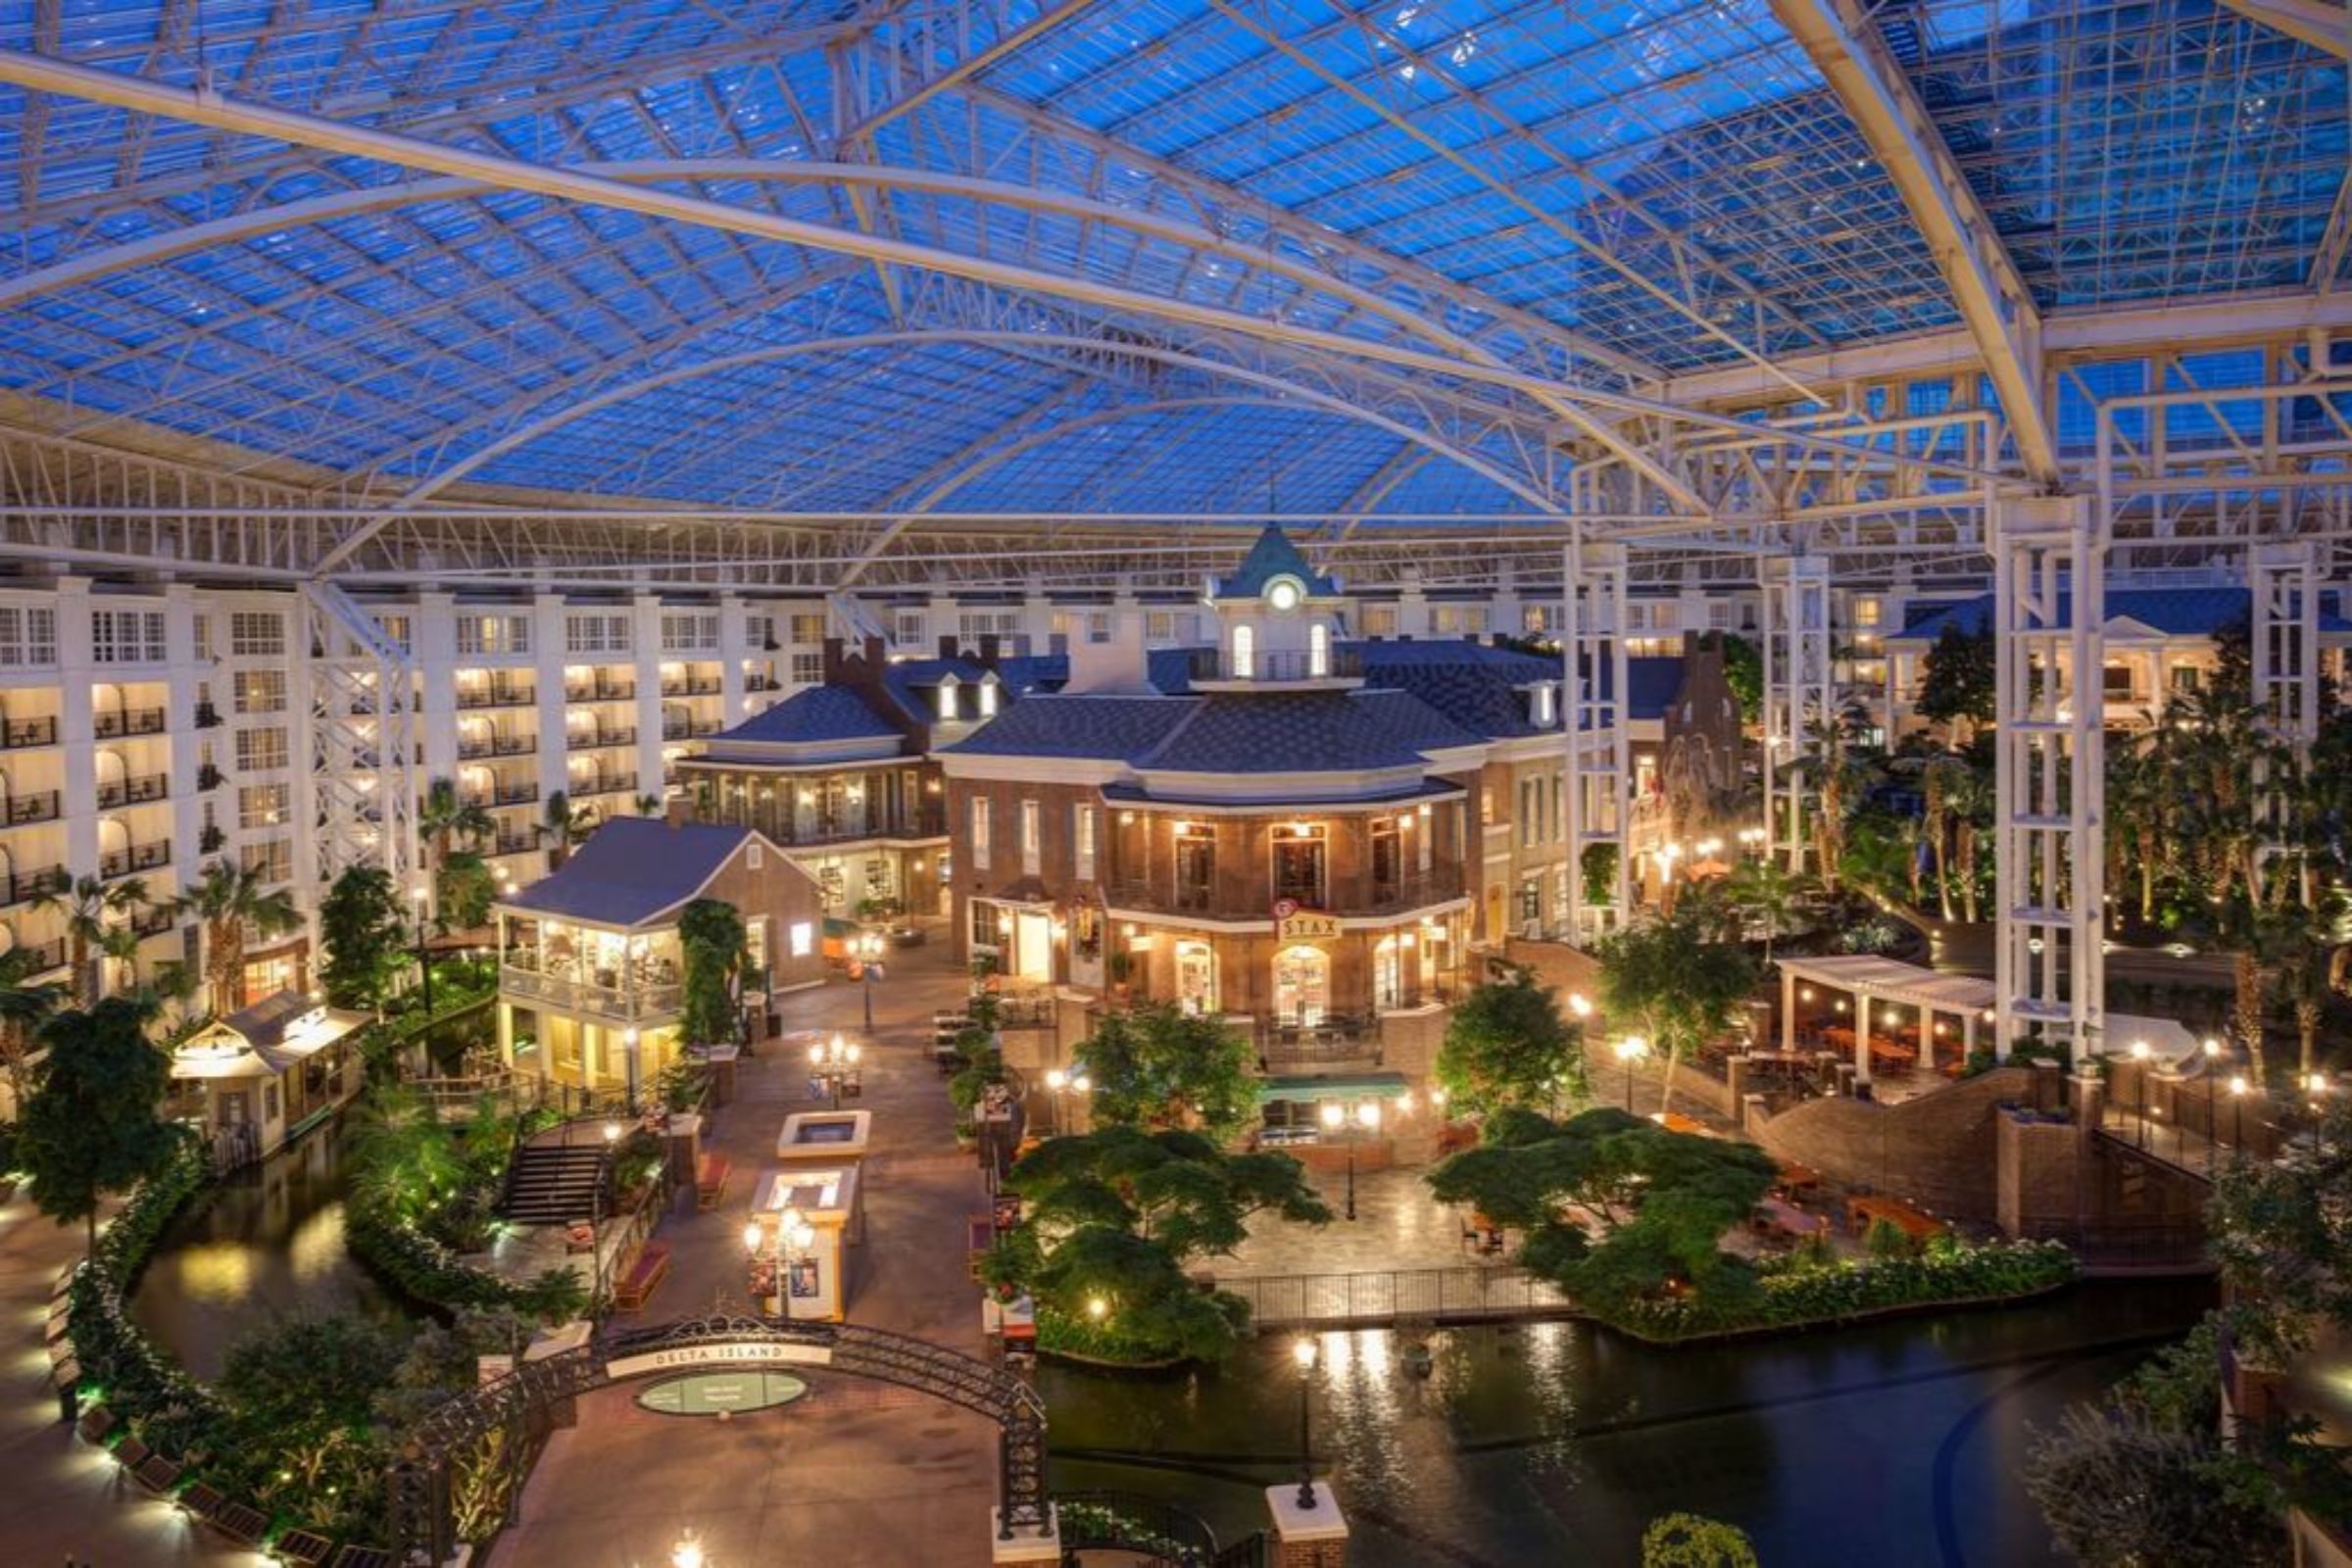 Gaylord Opryland Resort & Convention Center, Nashville, Tennessee Start  From SGD per night - Price, Address & Reviews